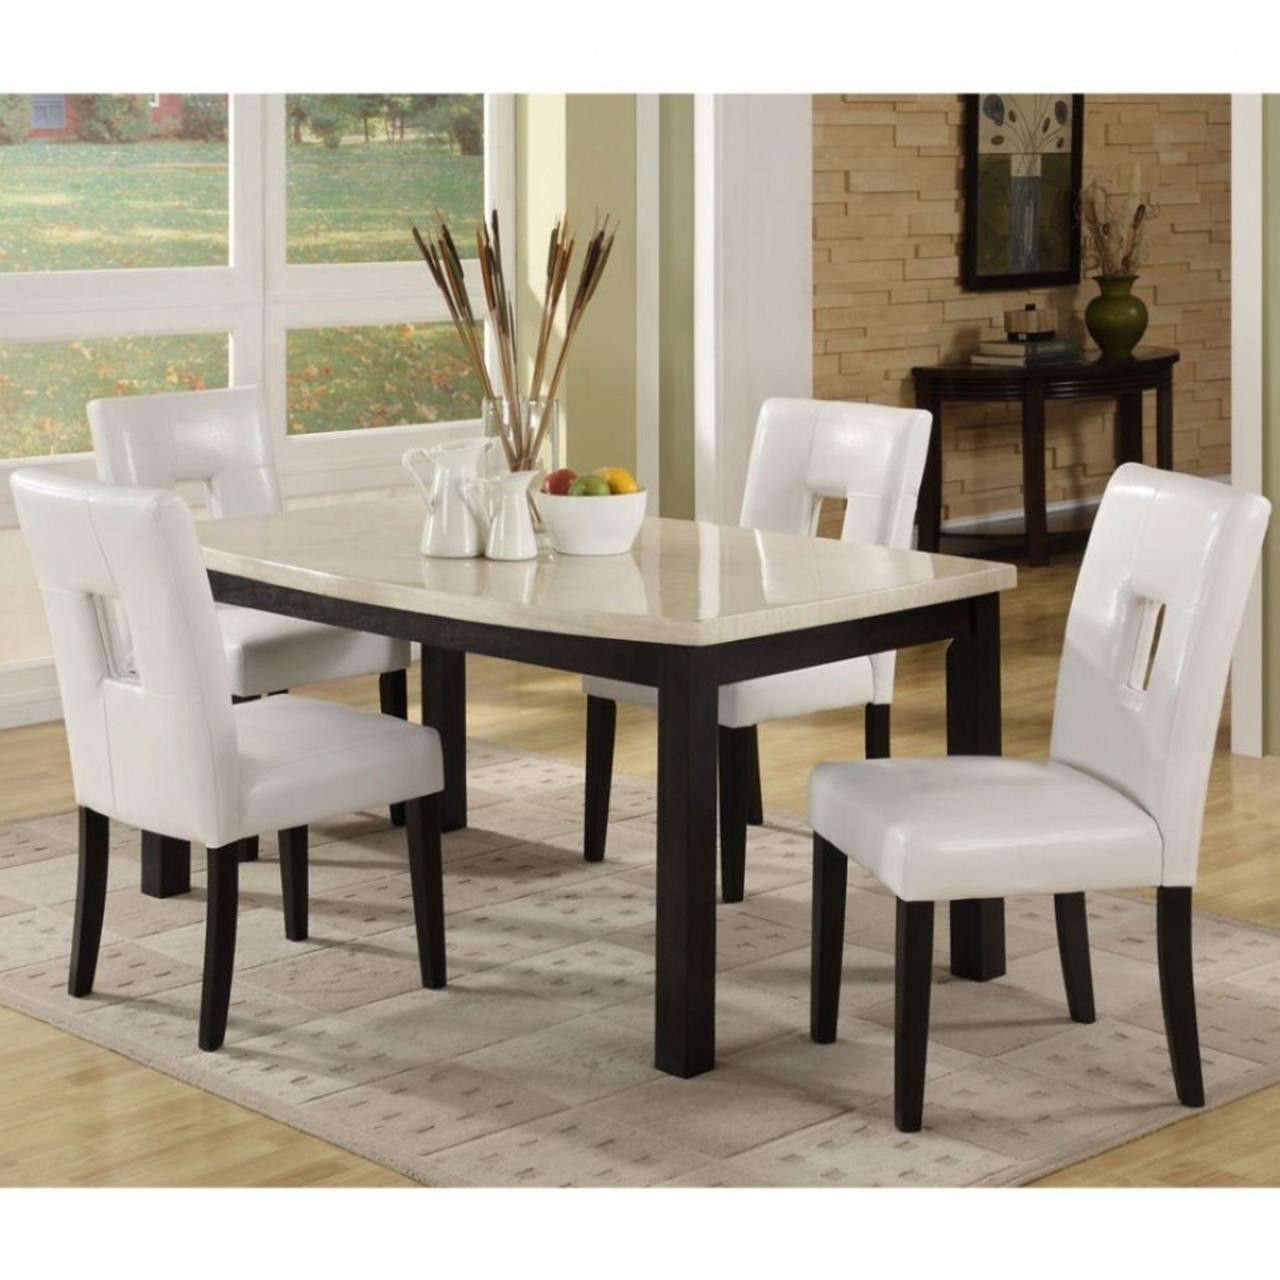 Kitchen Sets For Small Spaces
 Best 39 Perfect Kitchen Table Sets For Small Spaces